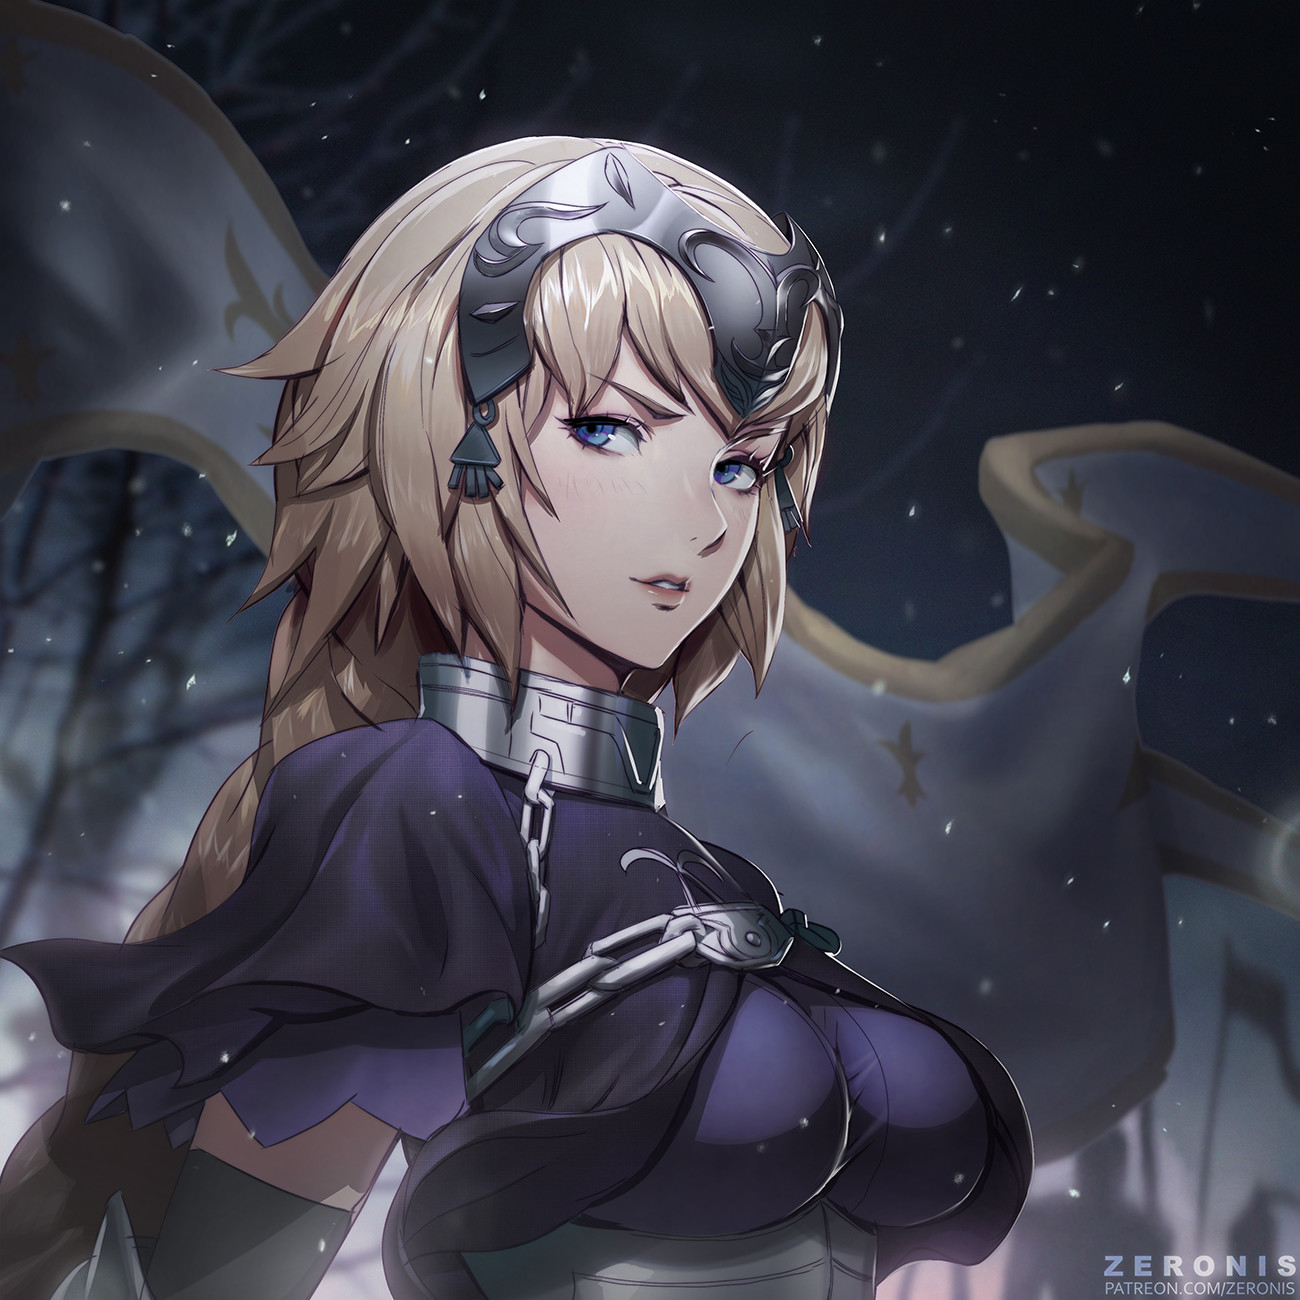 Anime 1300x1300 anime girls Fate series Zeronis Fate/Grand Order Fate/Apocrypha  big boobs fantasy armor Jeanne d'Arc (Fate) Ruler (Fate/Apocrypha) fan art 2D blonde